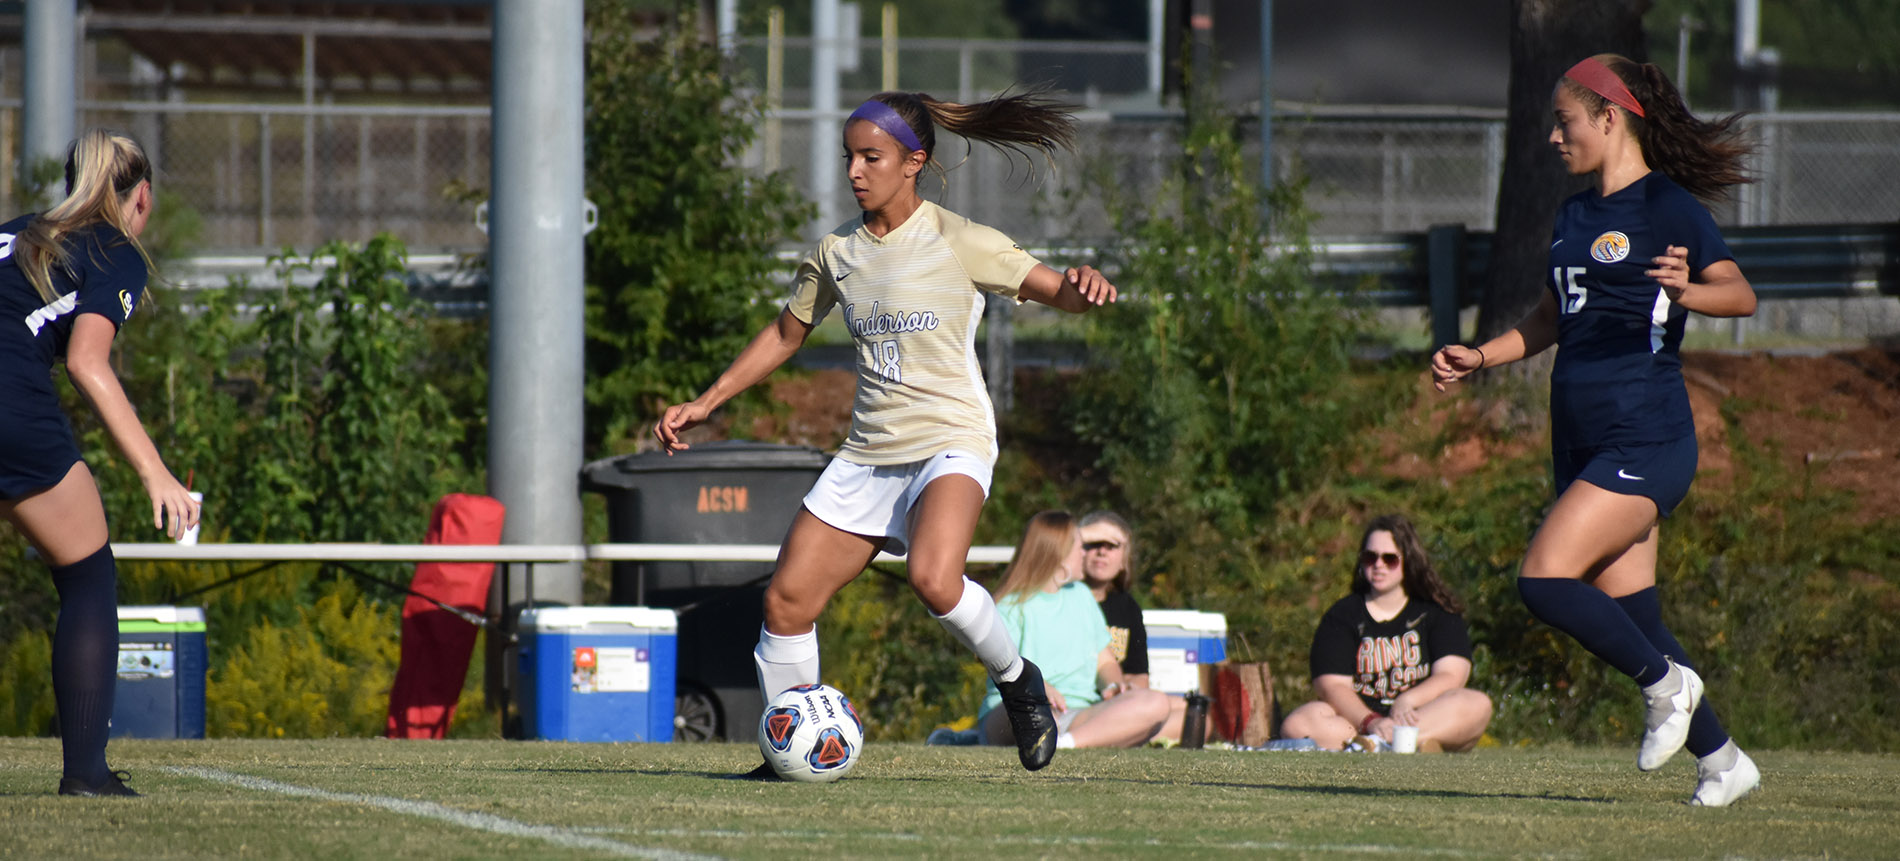 Hat Trick from Cepeda catapults Trojans past Cobras; 4-0